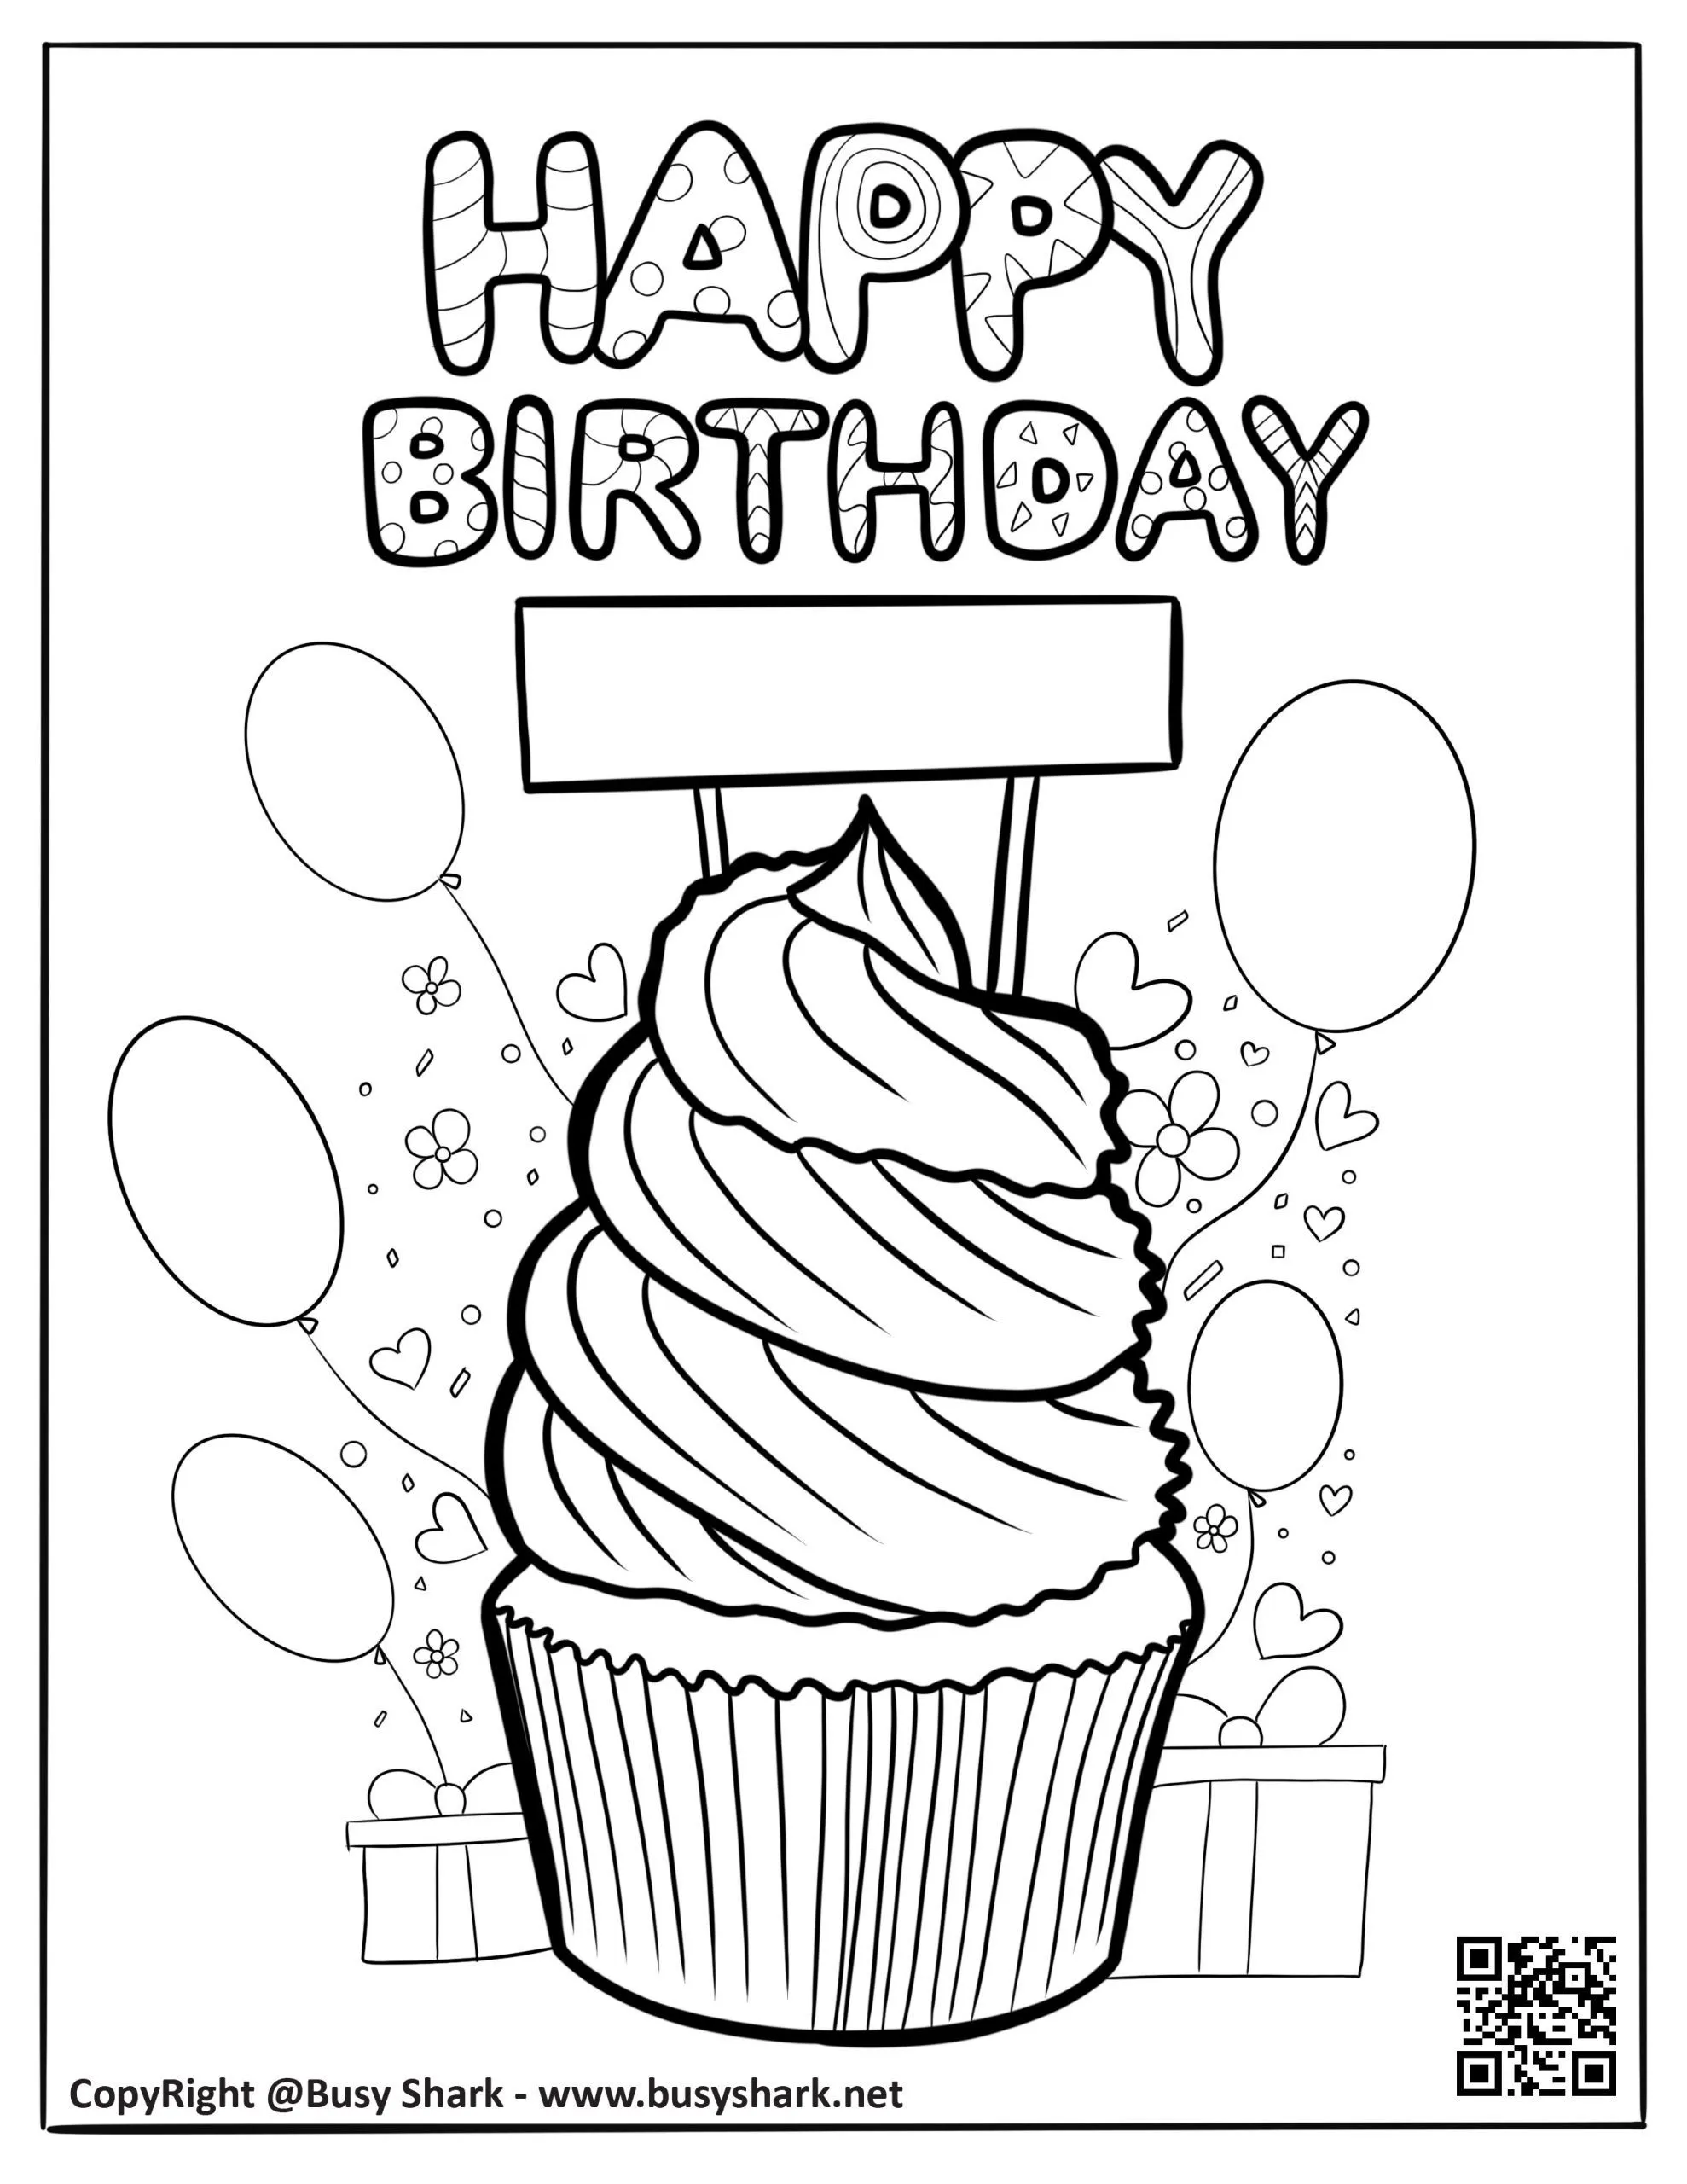 Happy birthday coloring page free printable